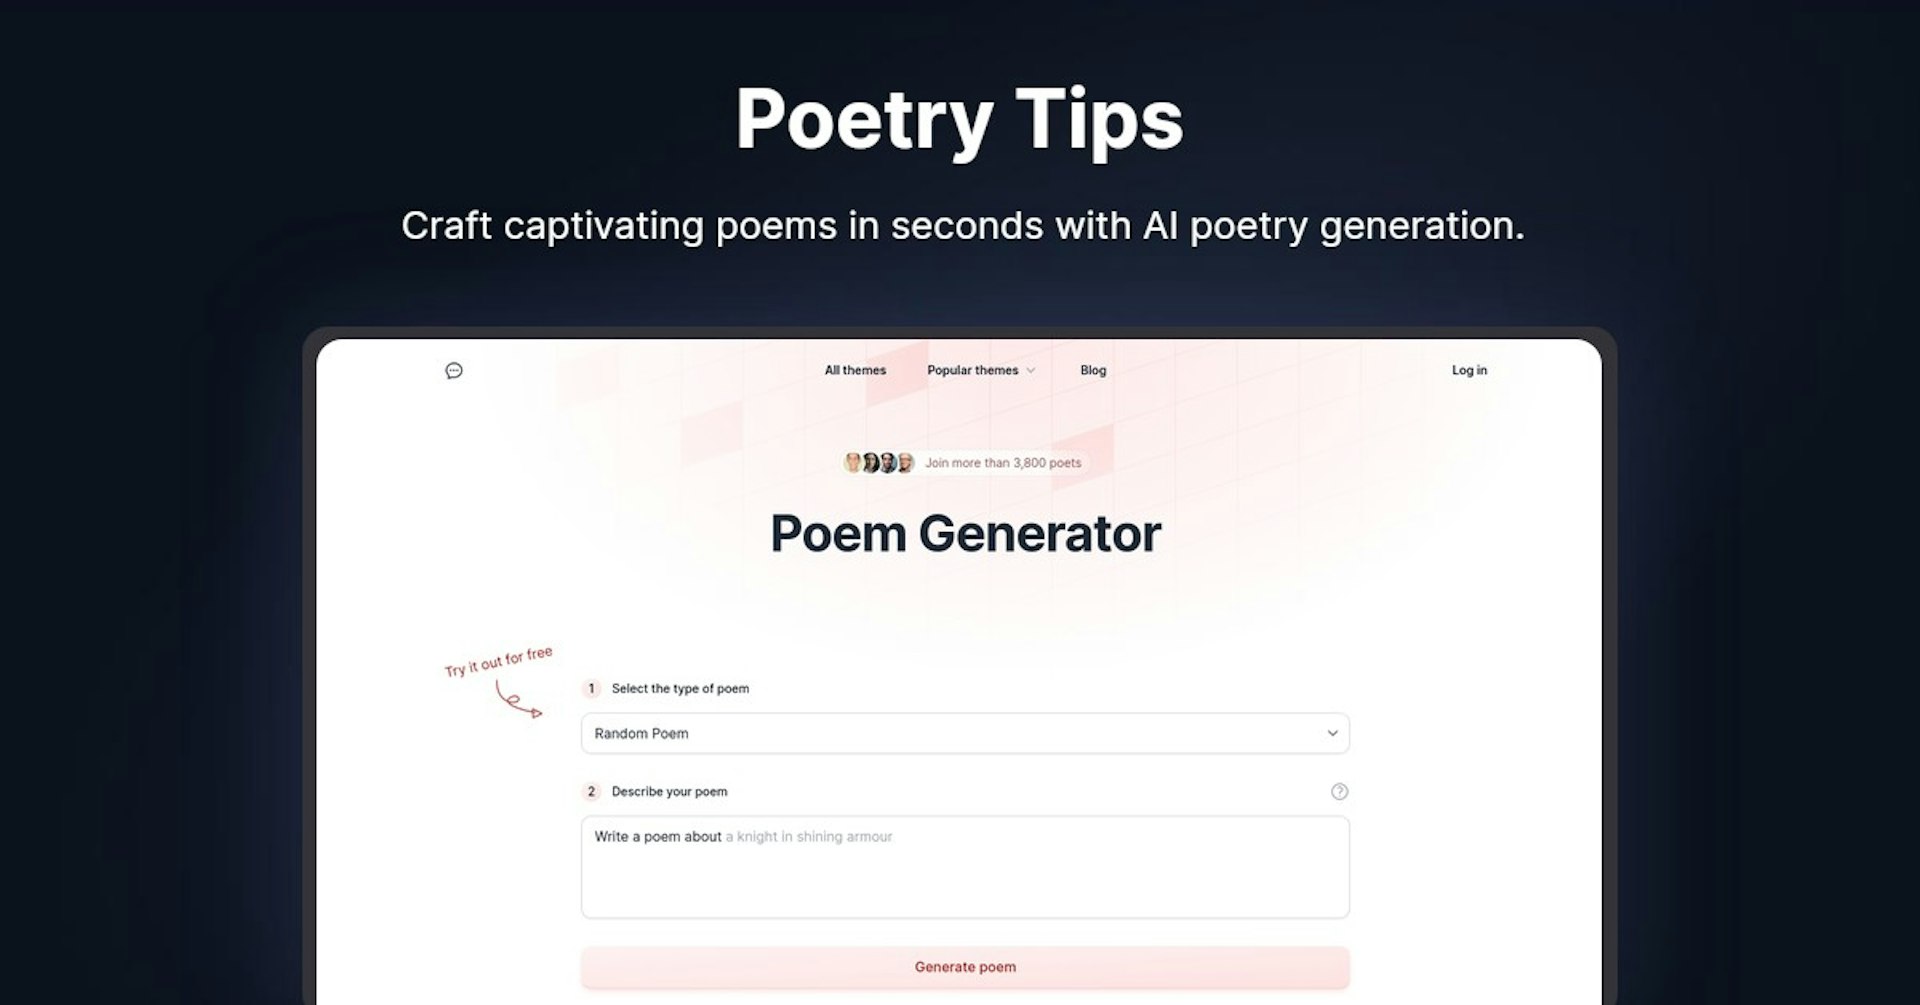 Poetry Tips